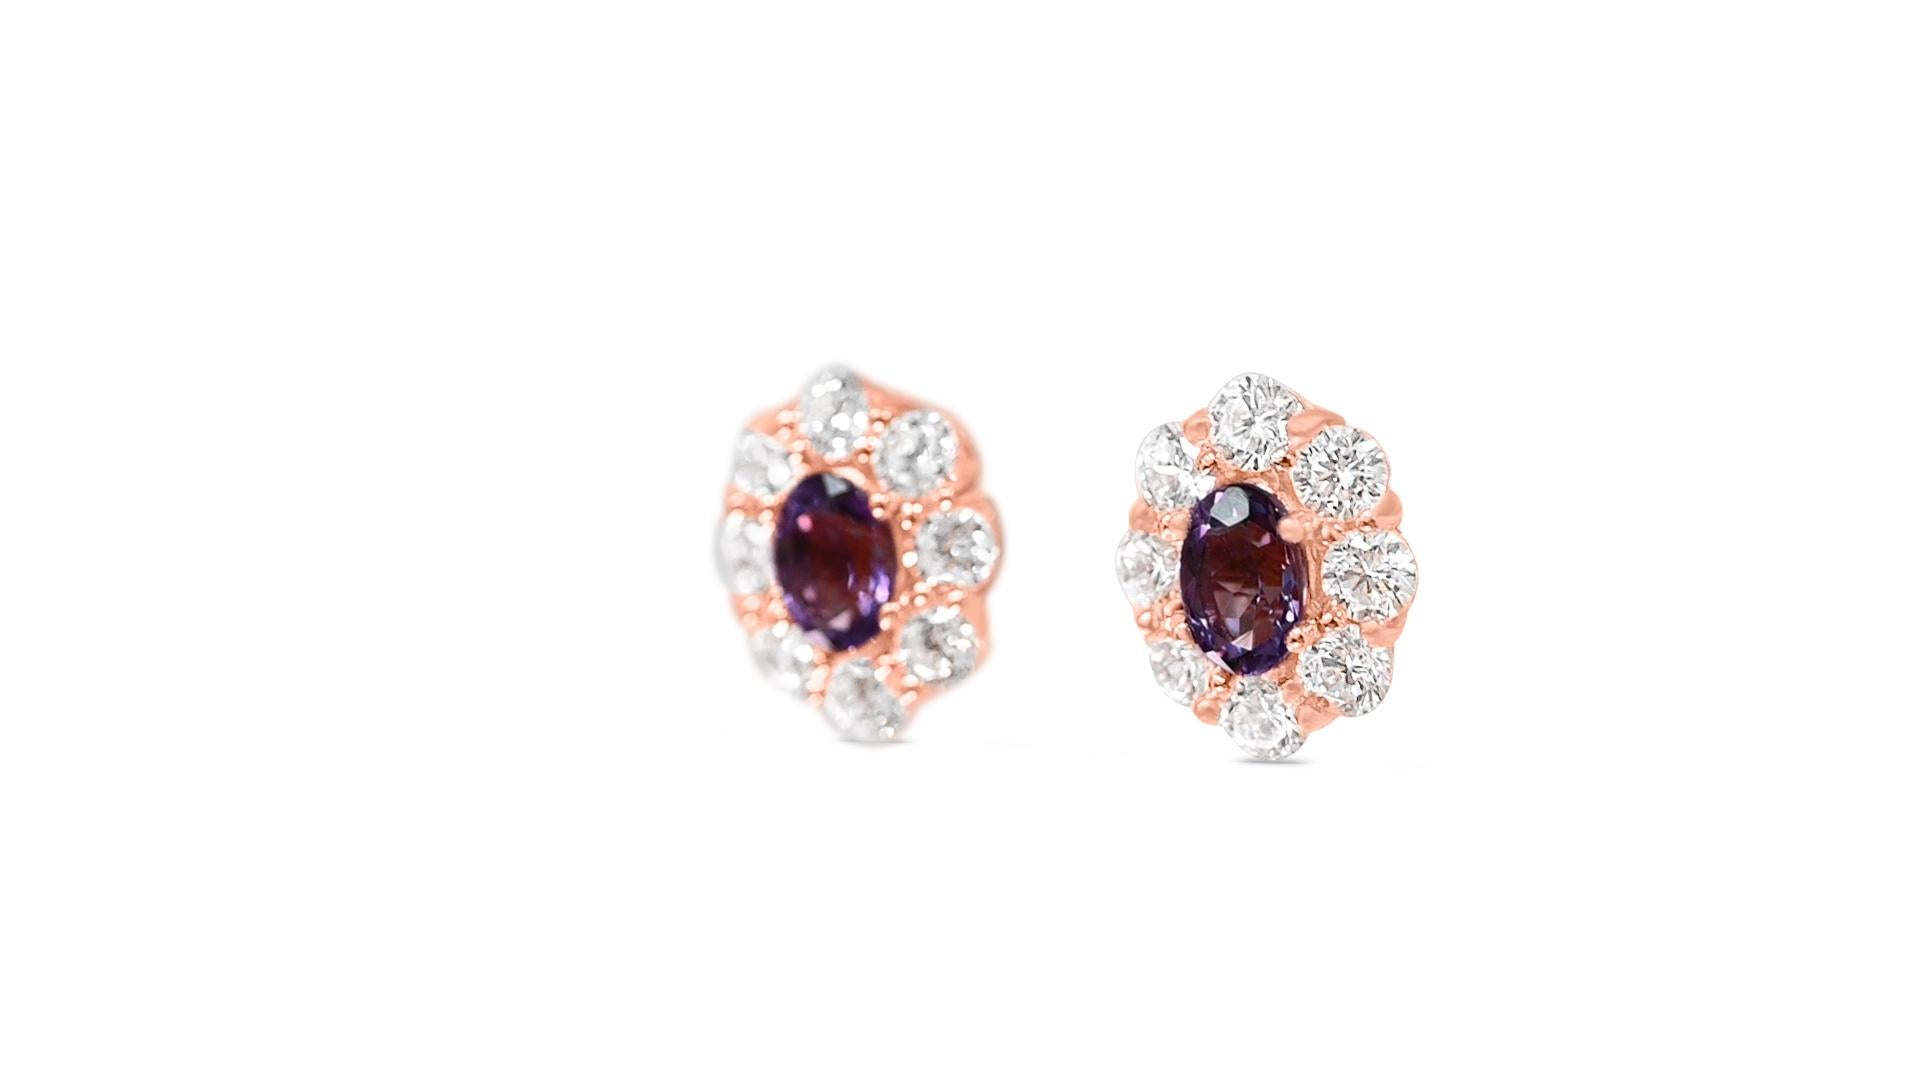 Welcome to Blue Star Gems NY LLC! Discover popular engagement Studs Earrings & wedding Earrings designs from classic to vintage inspired. We offer Joyful jewelry for everyday wear. Just for you. We go above and beyond the current industry standards